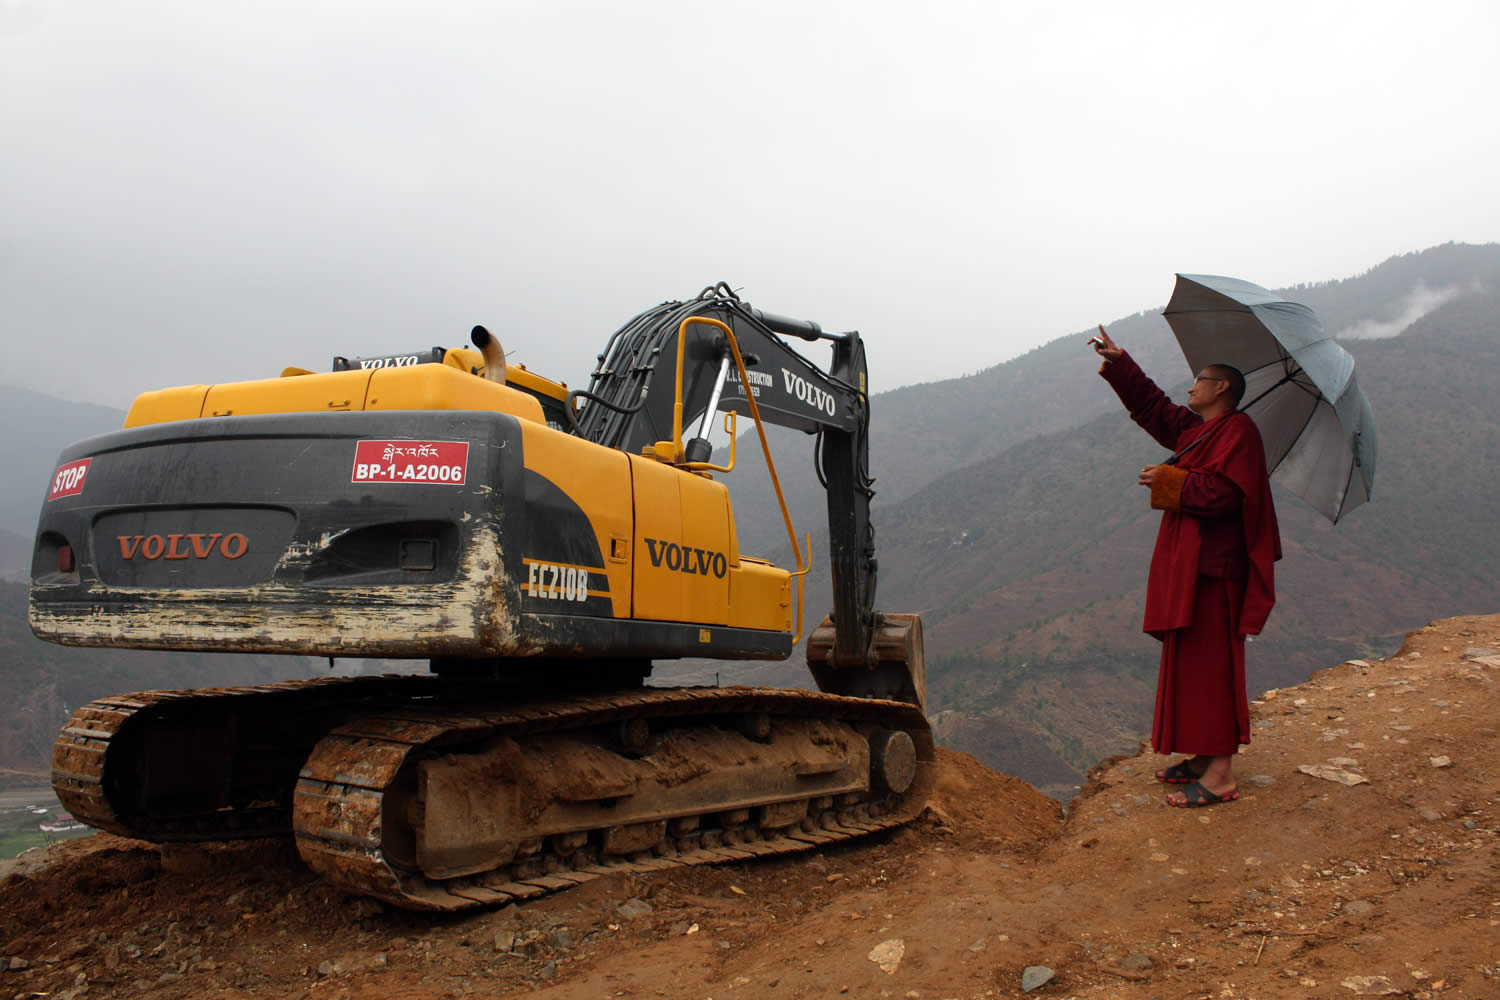 A monk from the Kila Gompa asks the machine operator to allow pilgrimage vechicles to pass.